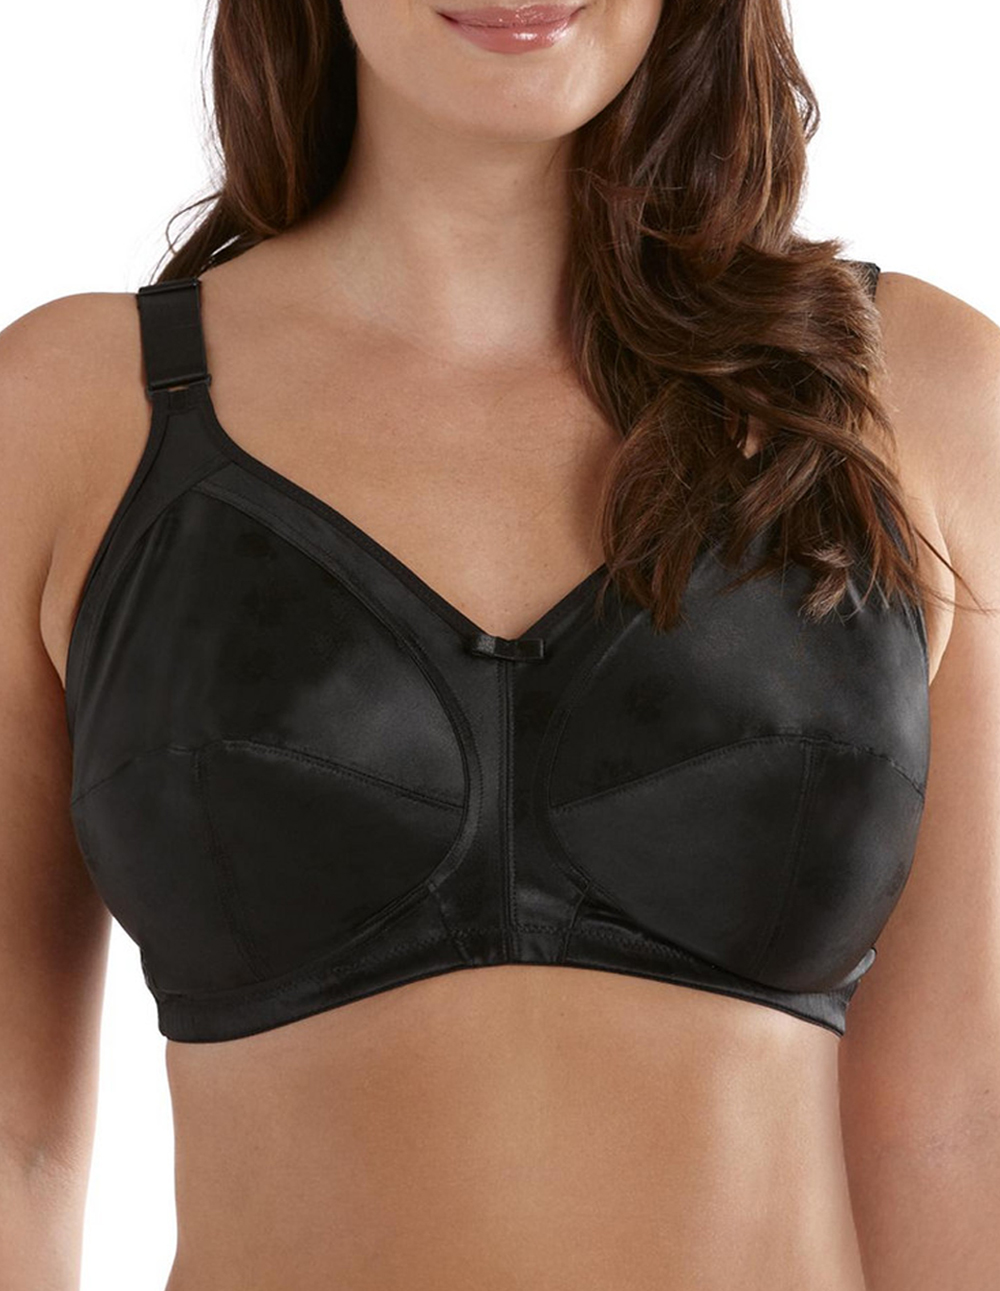 Fandf Black Hetty Full Cup Total Support Self Printed Bra Size 38 